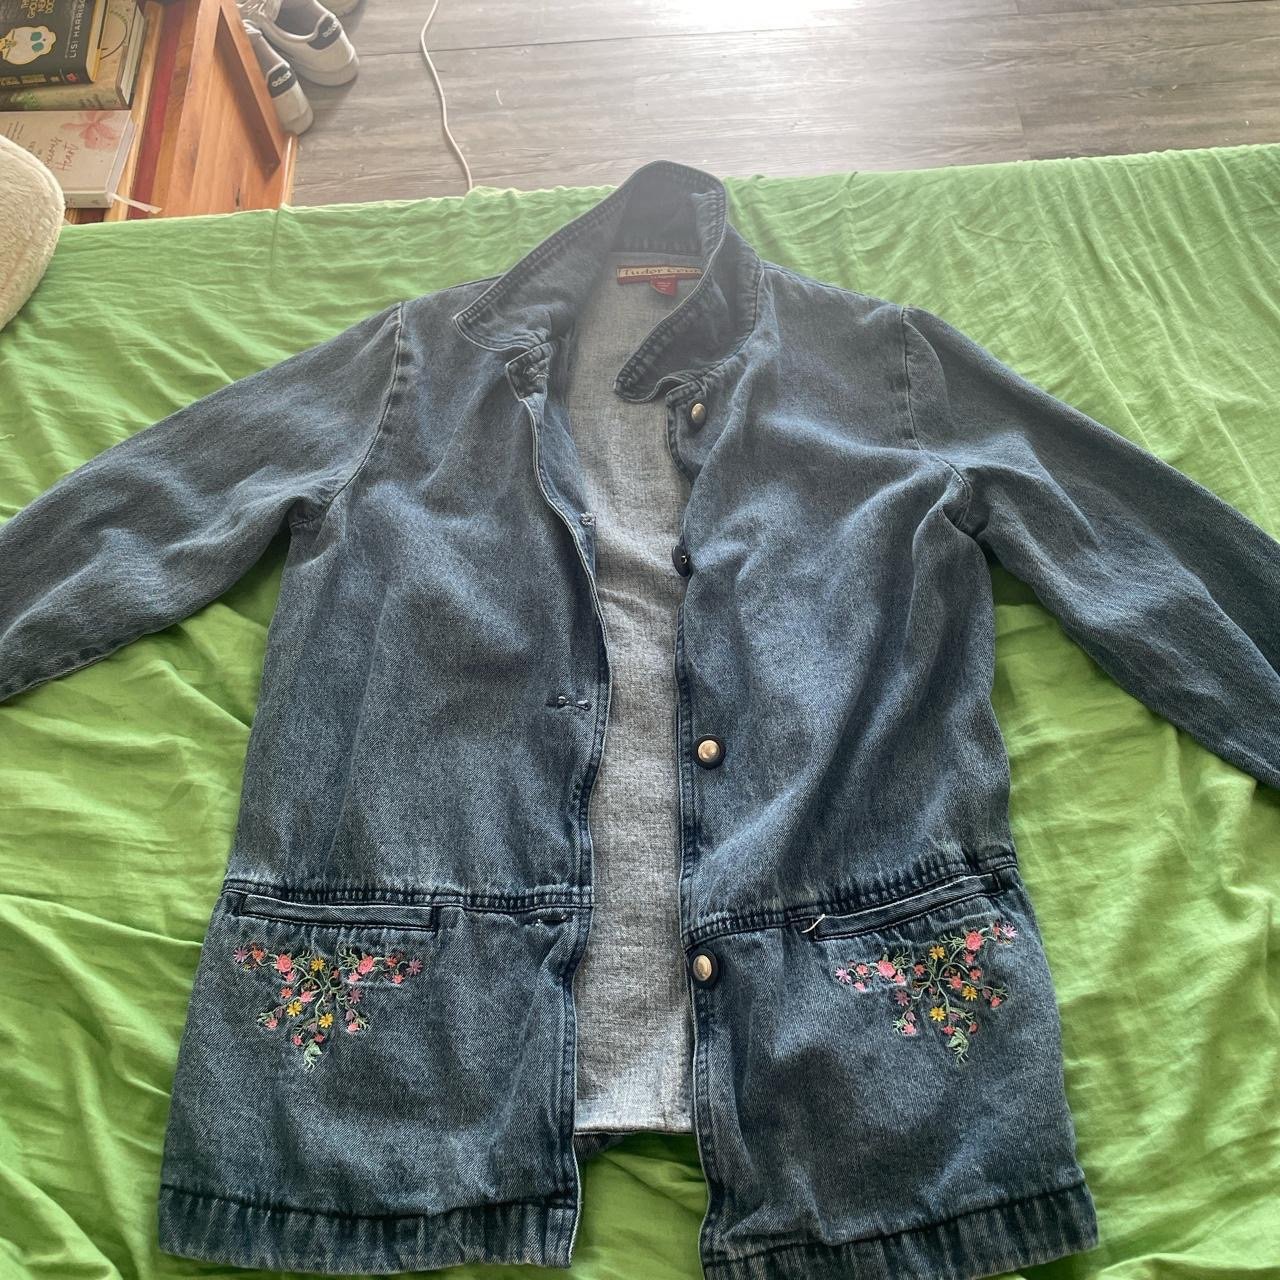 Wholesale price embroidered denim jacket nQ0W1Hq7y on s